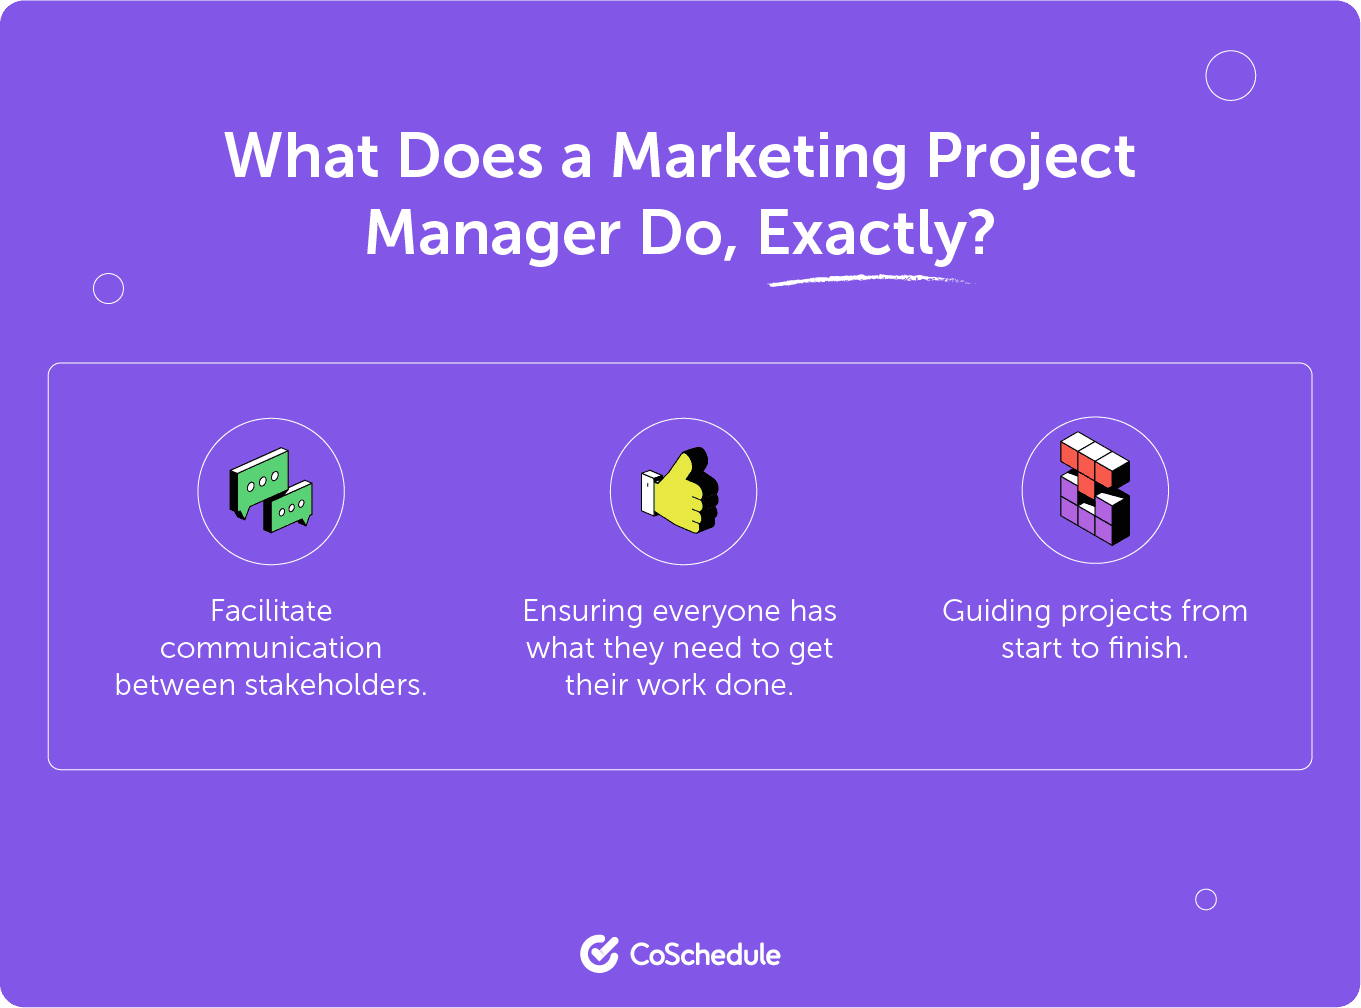 What does a marketing project manager do?